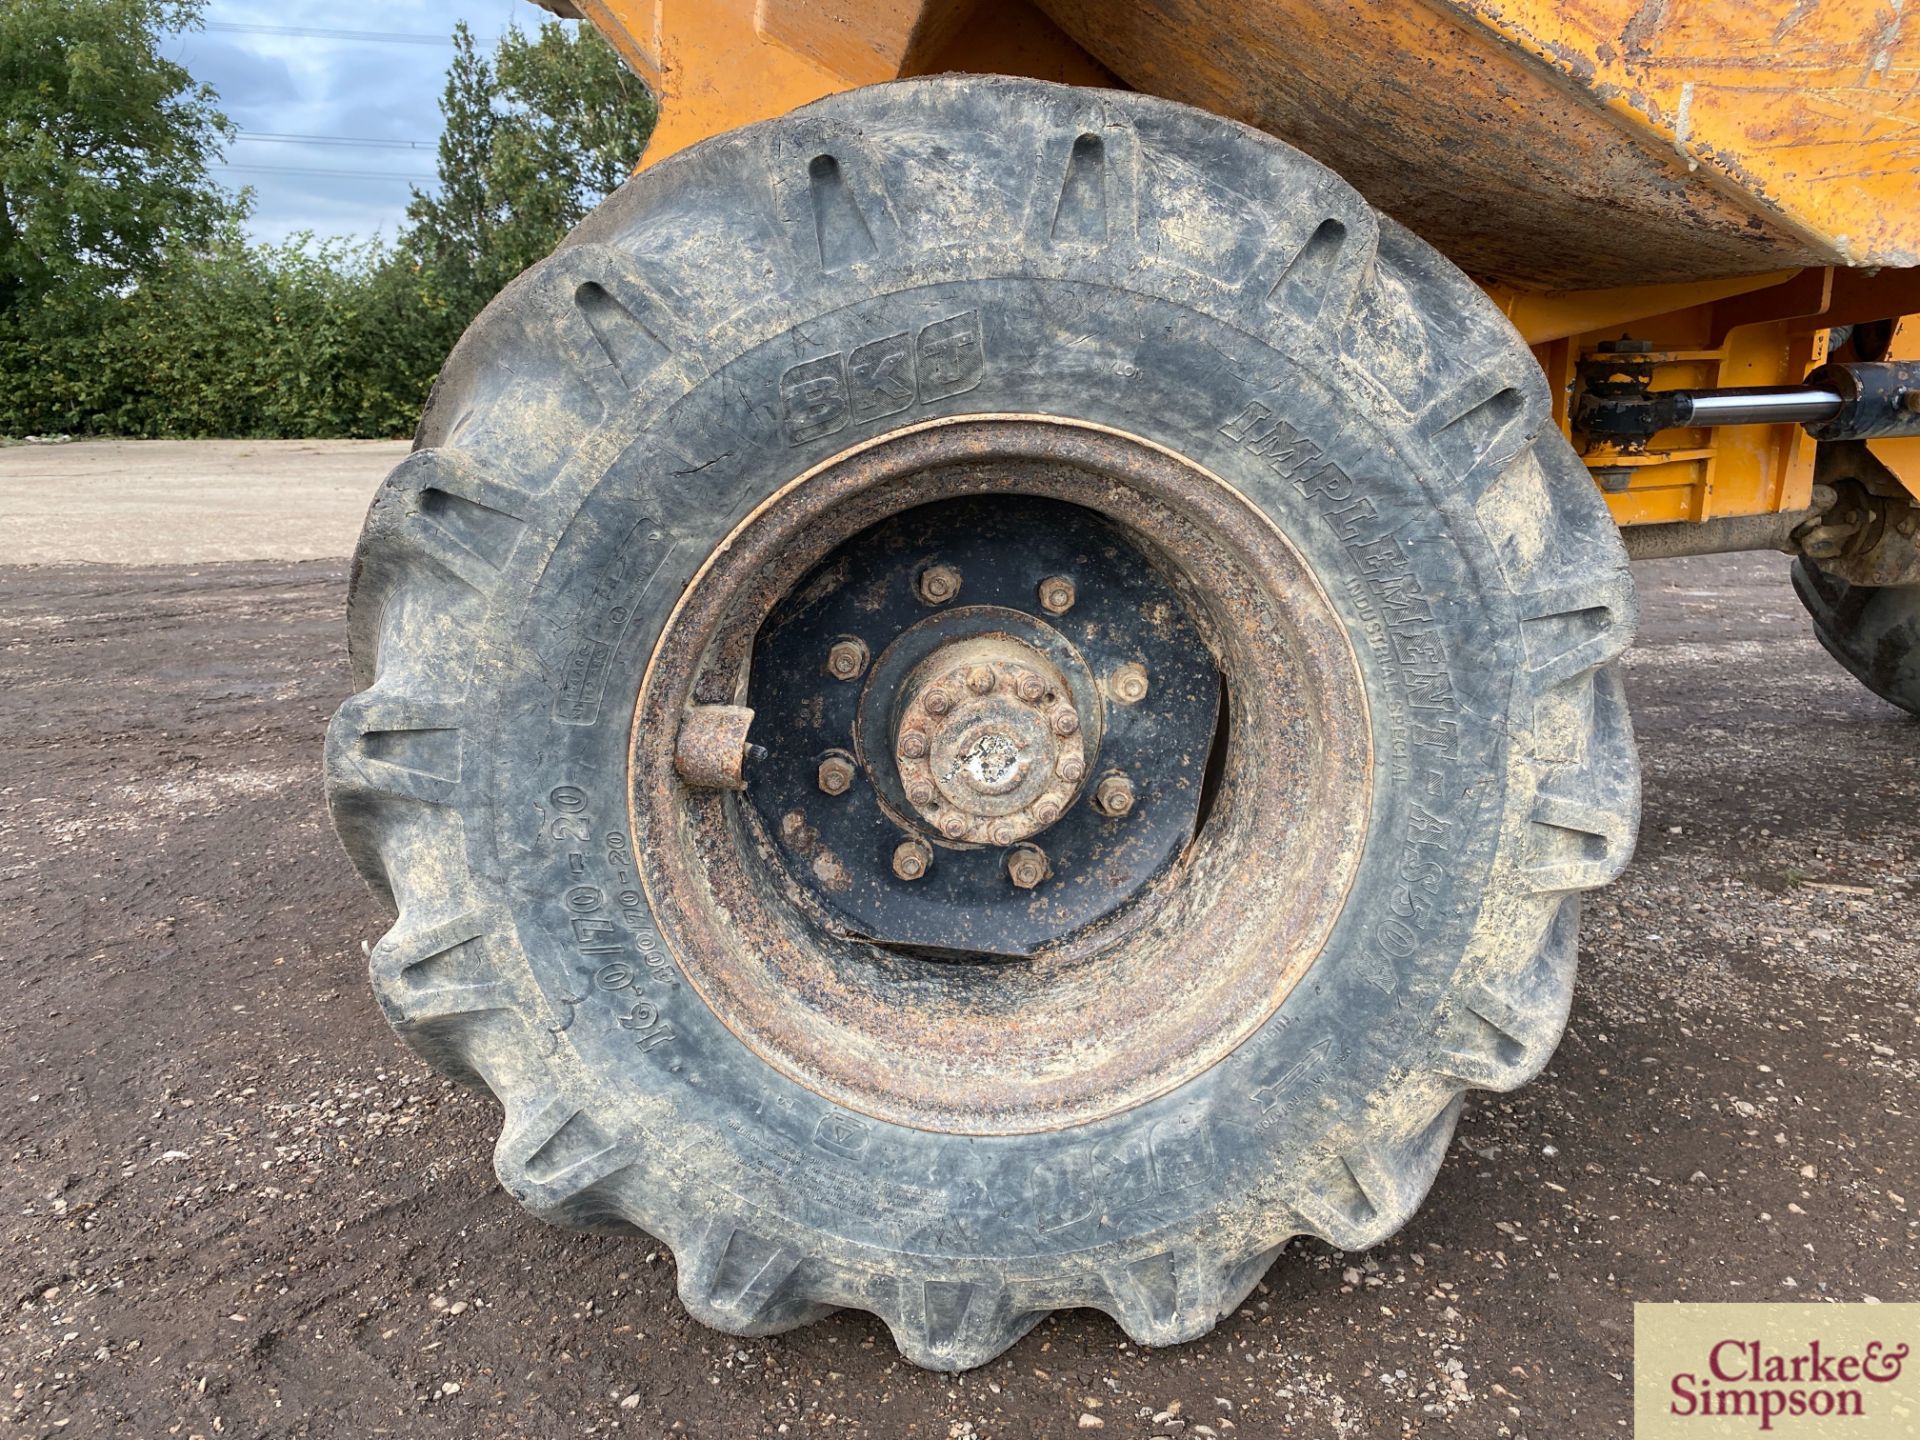 Benford 6T 4WD pivot steer dumper. 2000. Serial number SLBDNOOEY7H0721. 405/70R20 wheels and - Image 10 of 36